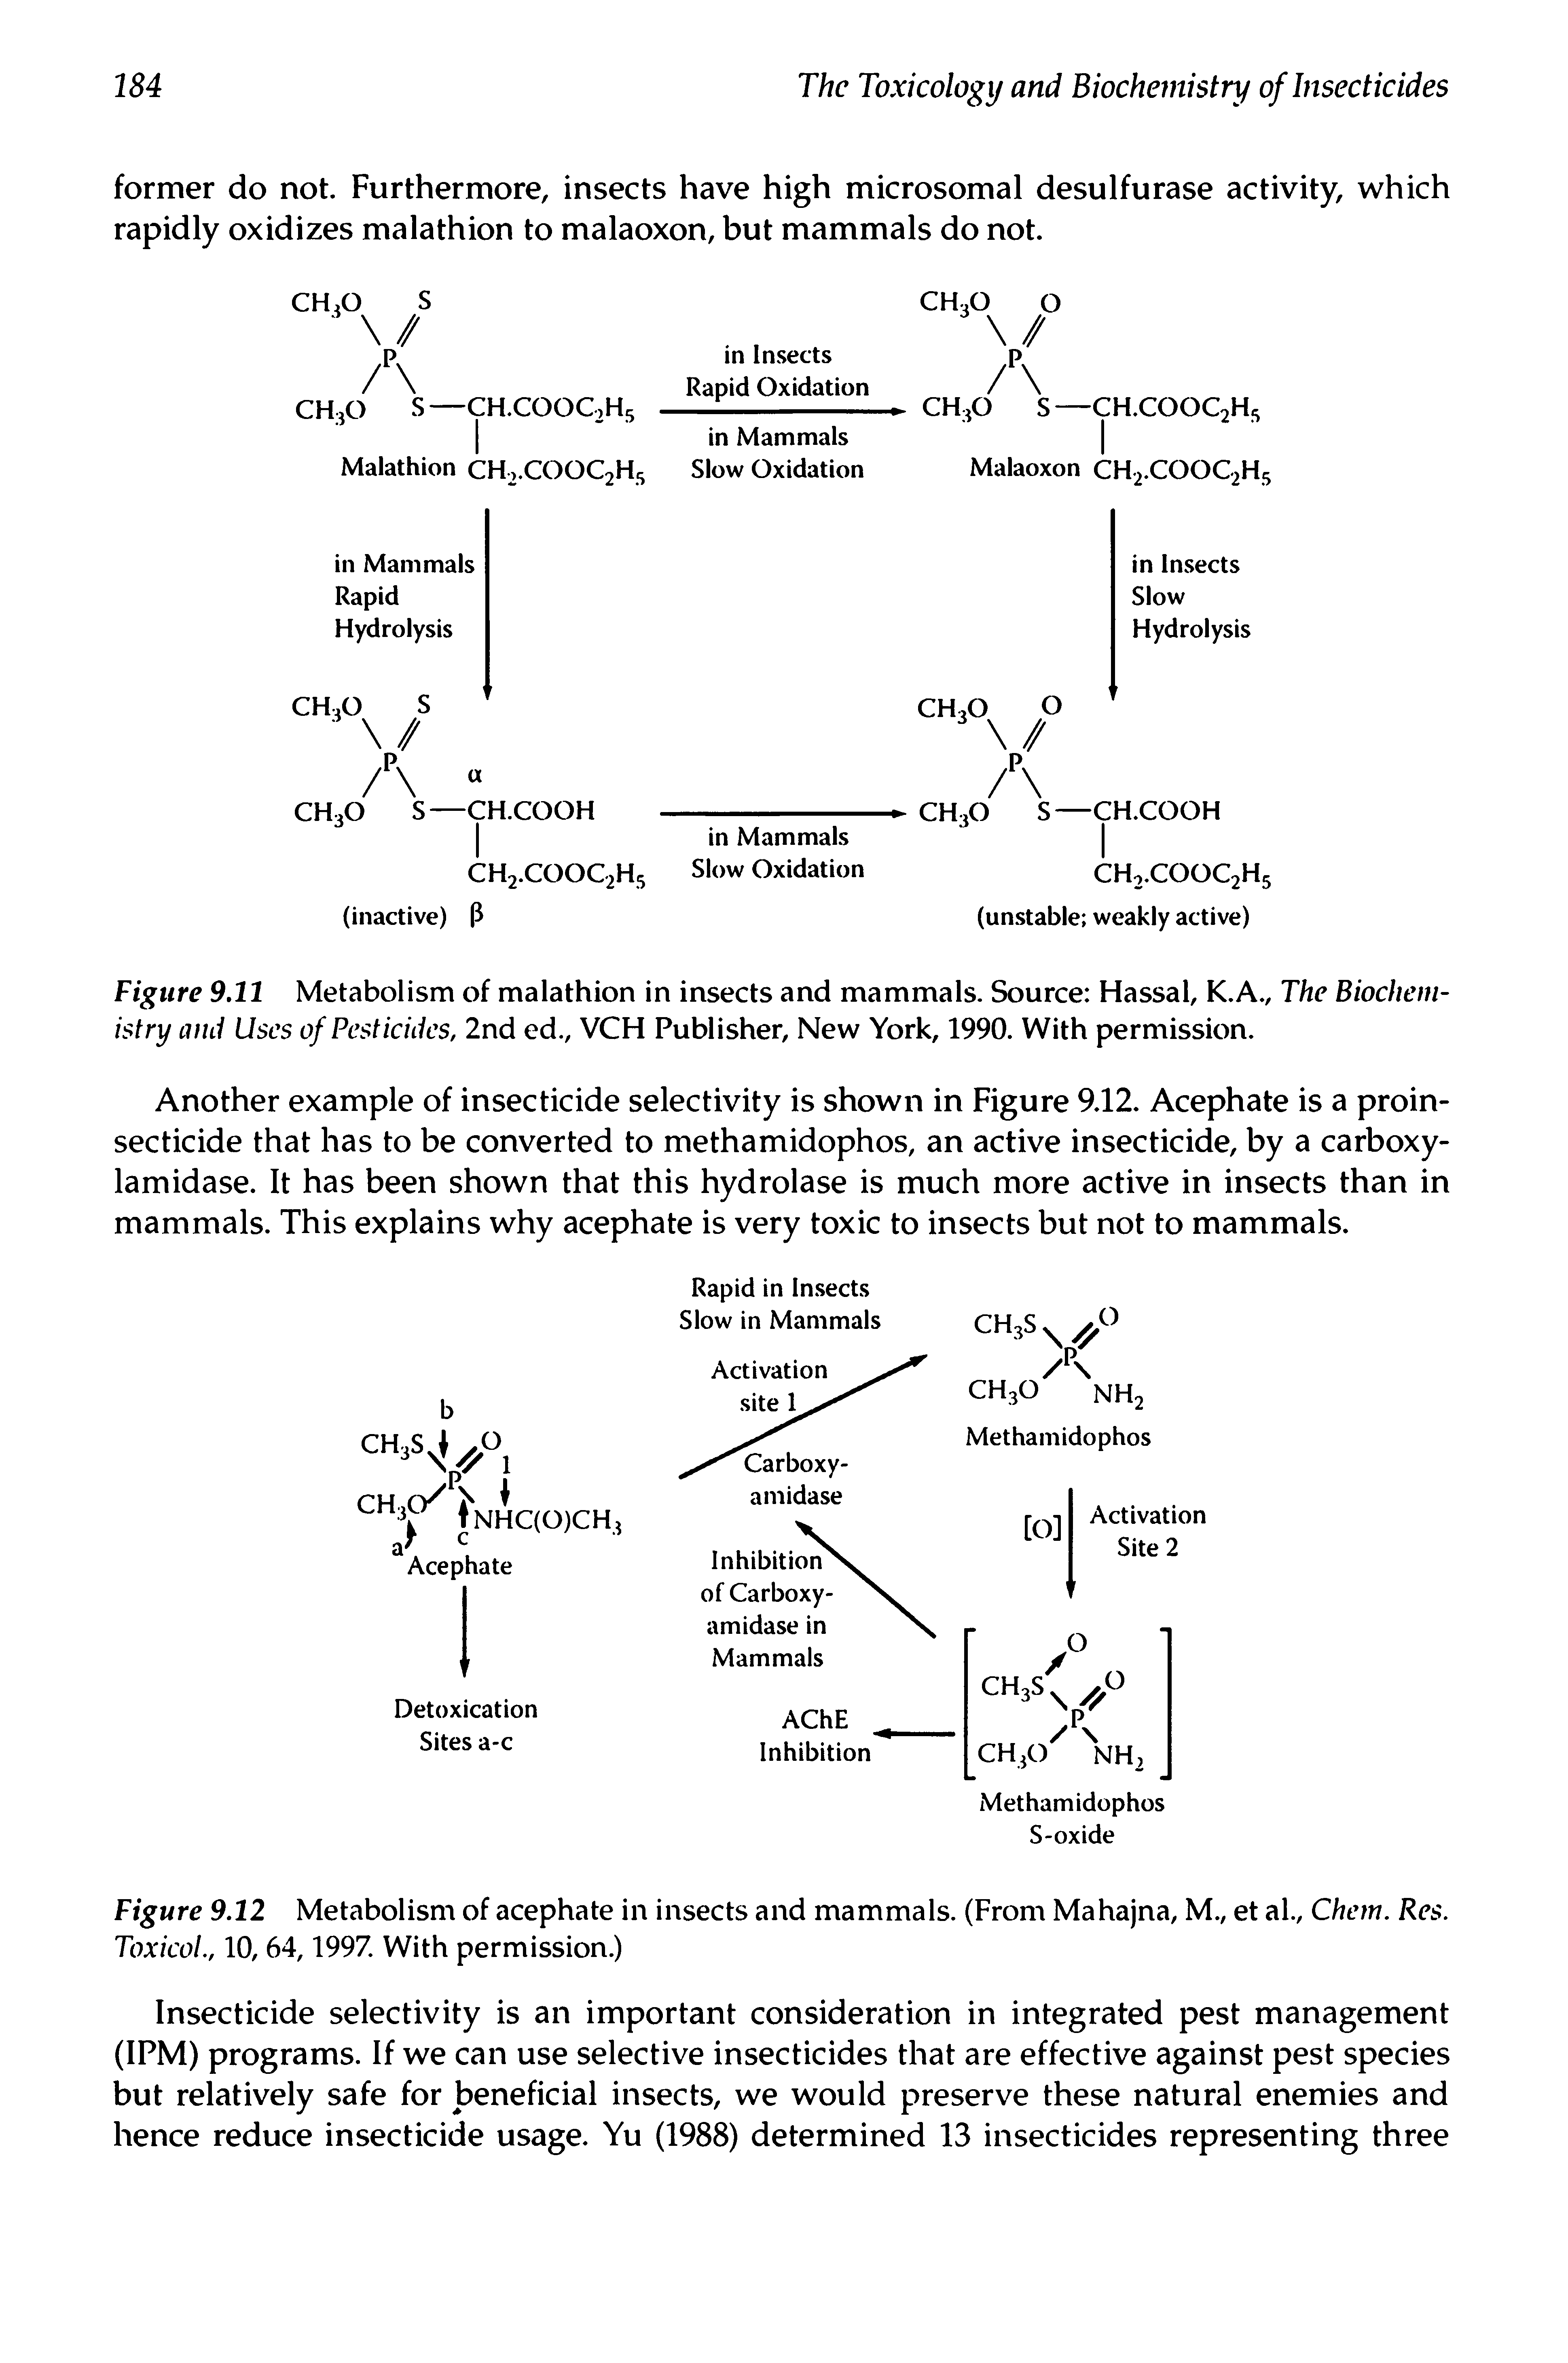 Figure 9.11 Metabolism of malathion in insects and mammals. Source Hassal, K.A., The Biochemistry and Uses of Pesticides, 2nd ed., VCH Publisher, New York, 1990. With permission.